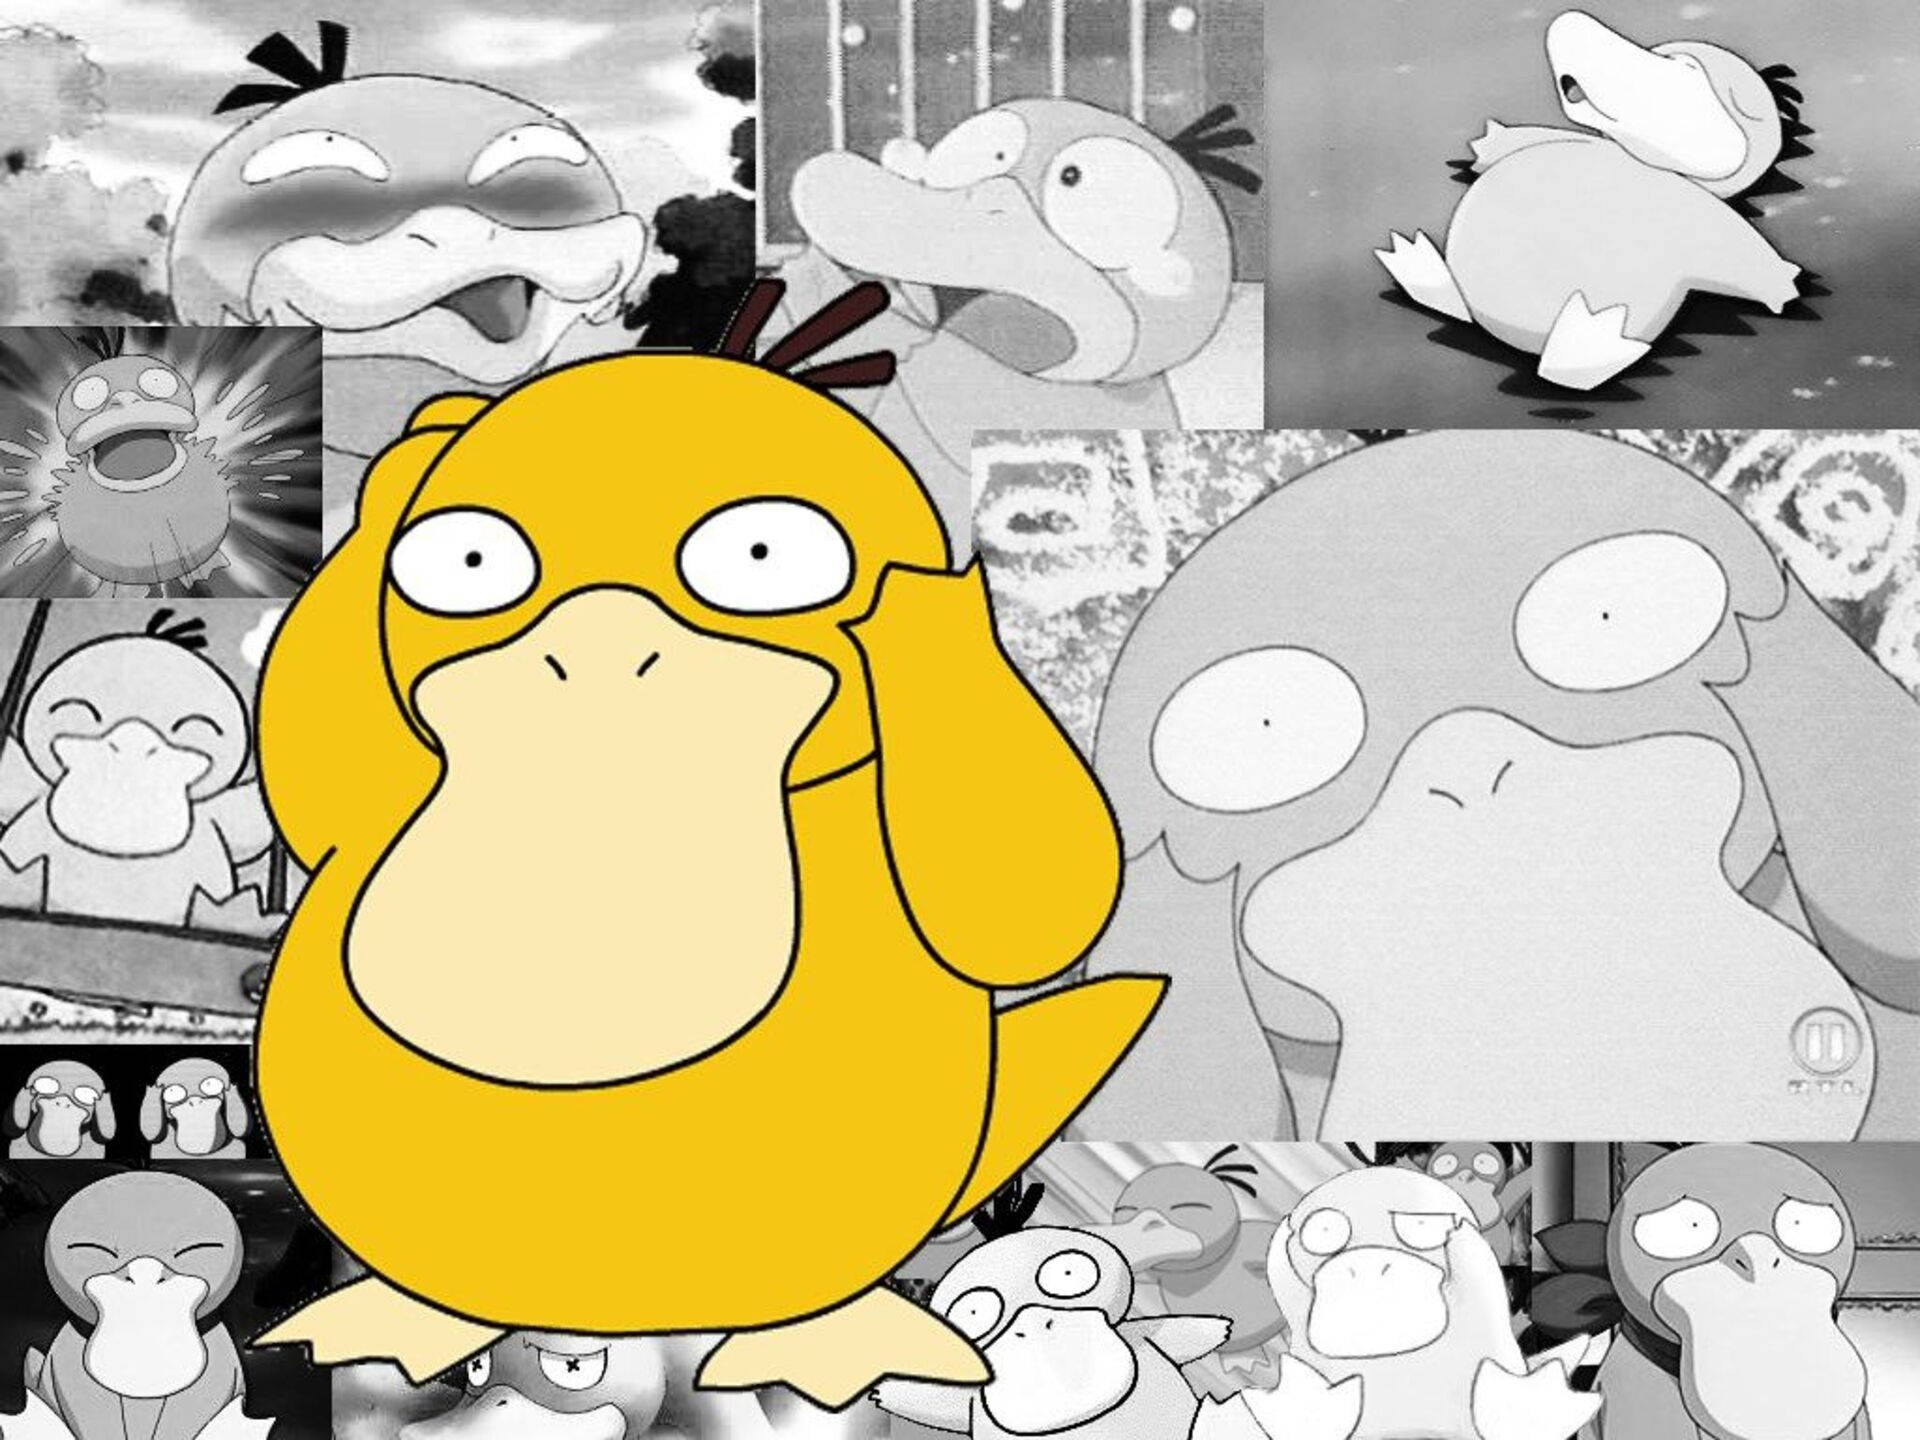 Everyone Loves That Funny Little Psyduck